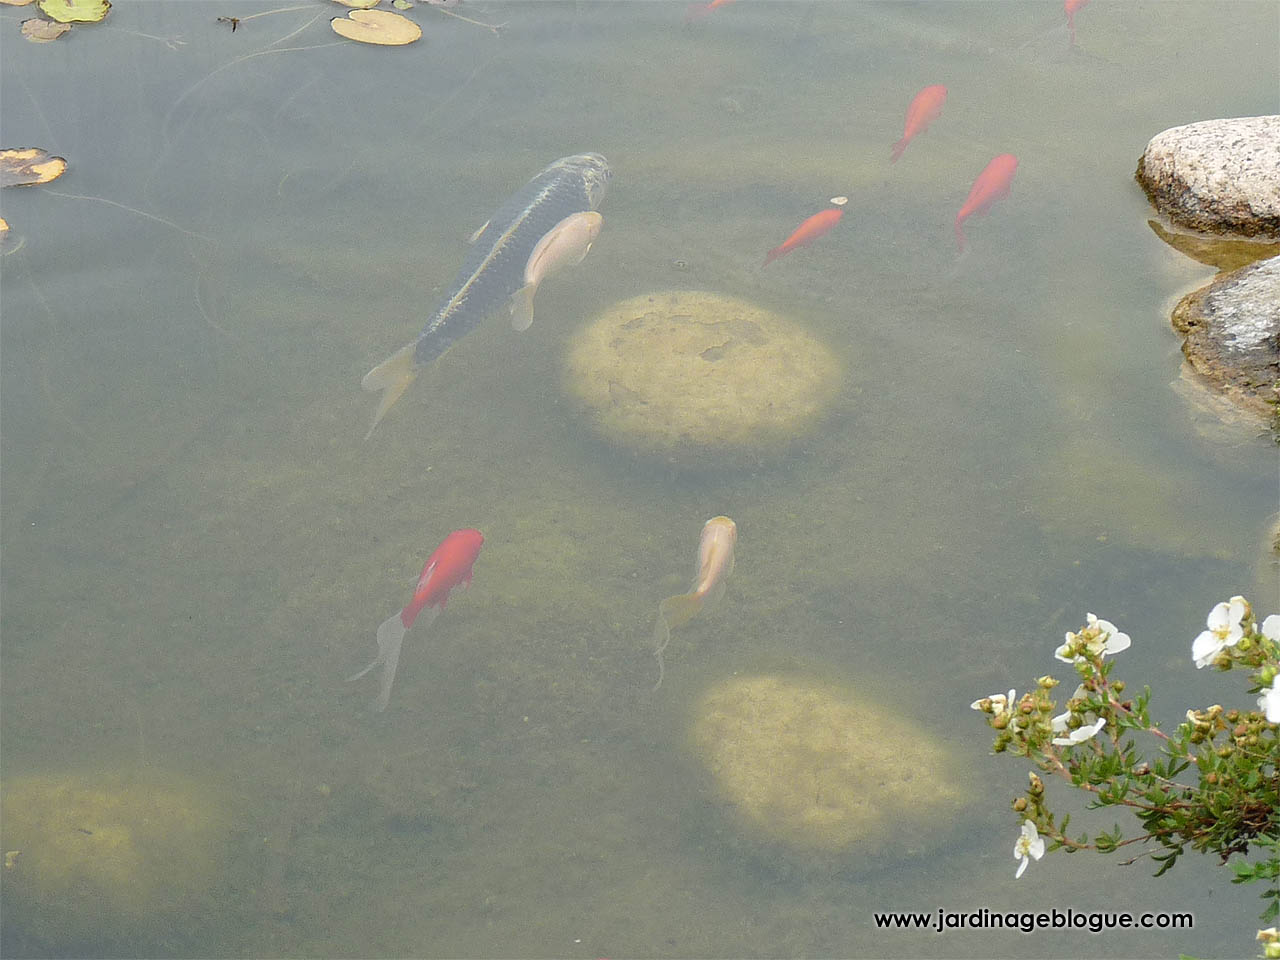 How to get fish out of a pond without draining it